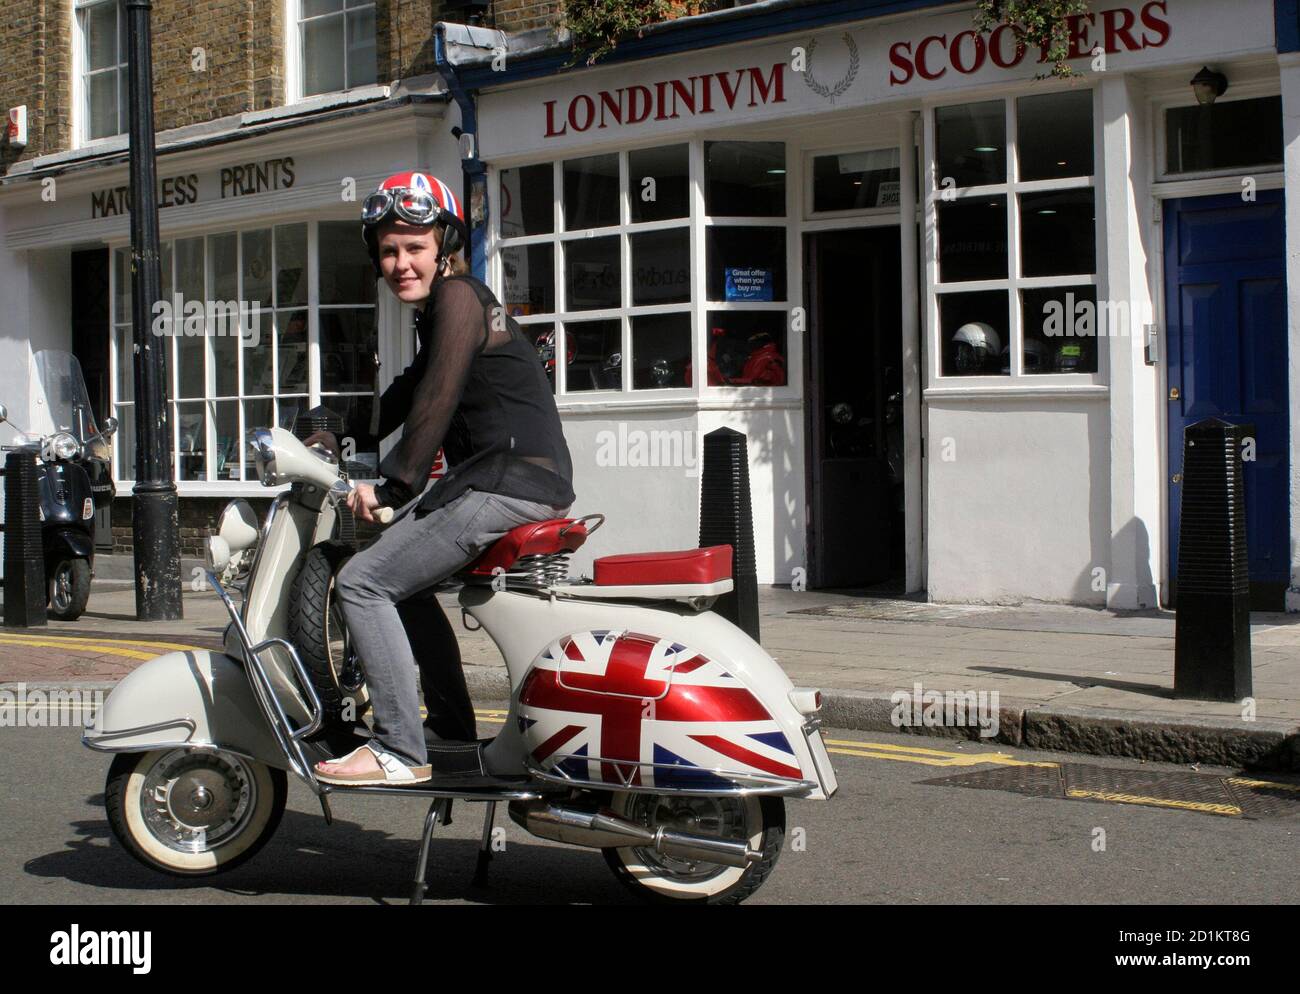 An unidentified woman poses on a vintage Vespa outside a Piaggio dealership  in London, September 27, 2006. London scooter sales have risen 16-fold to  8,000 in 2005 from 500 in 1993, especially